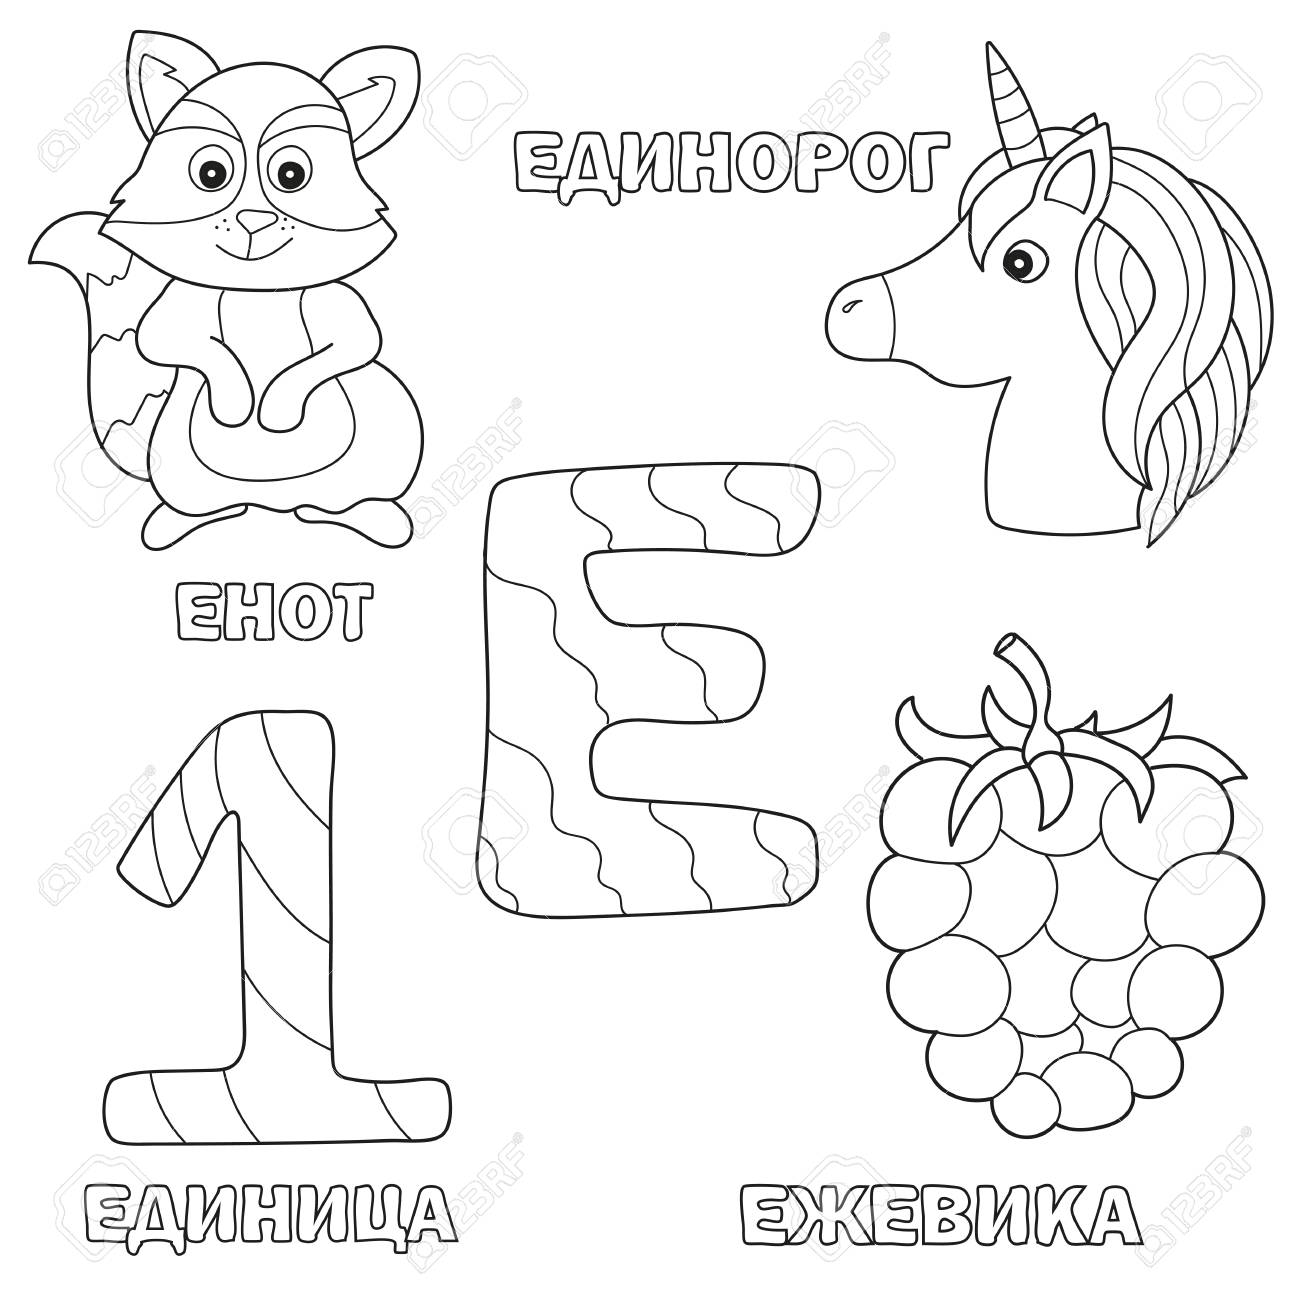 Alphabet letter with russian alphabet letters